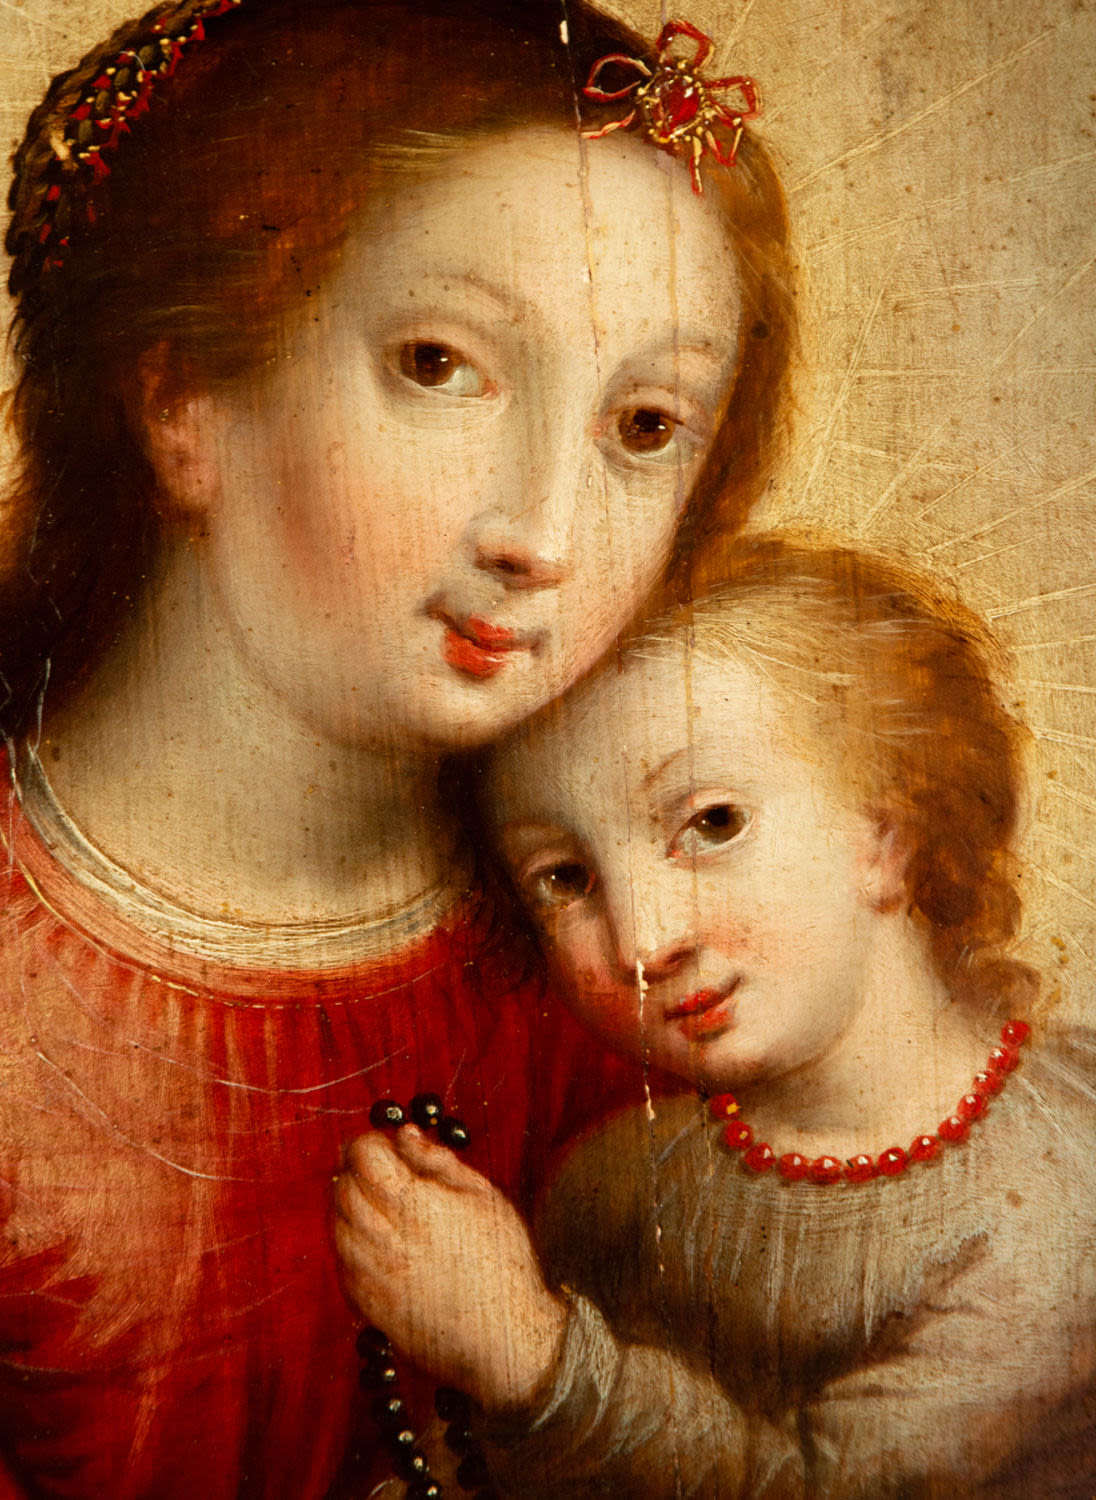 Virgin with Child in Arms, Italian Flemish school of the 16th century - Image 3 of 4